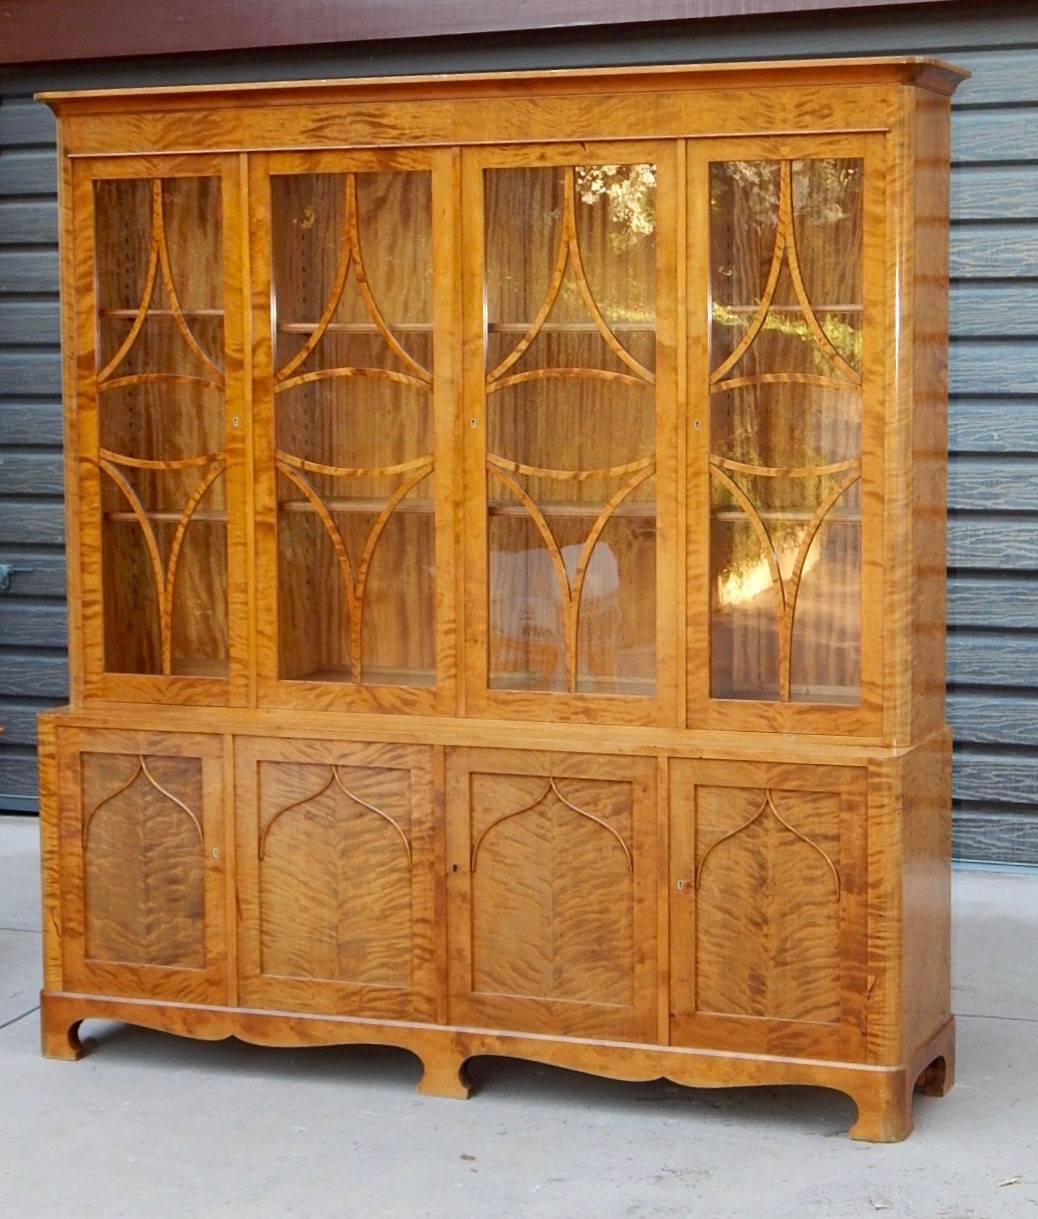 Swedish Art Deco-Renaissance Revival storage cabinet, bookcase, china cabinet. Rendered in highly figured golden flame birch wood. In excellent original condition with light wear. All original glass. All original shelves, Sweden, 1920s.